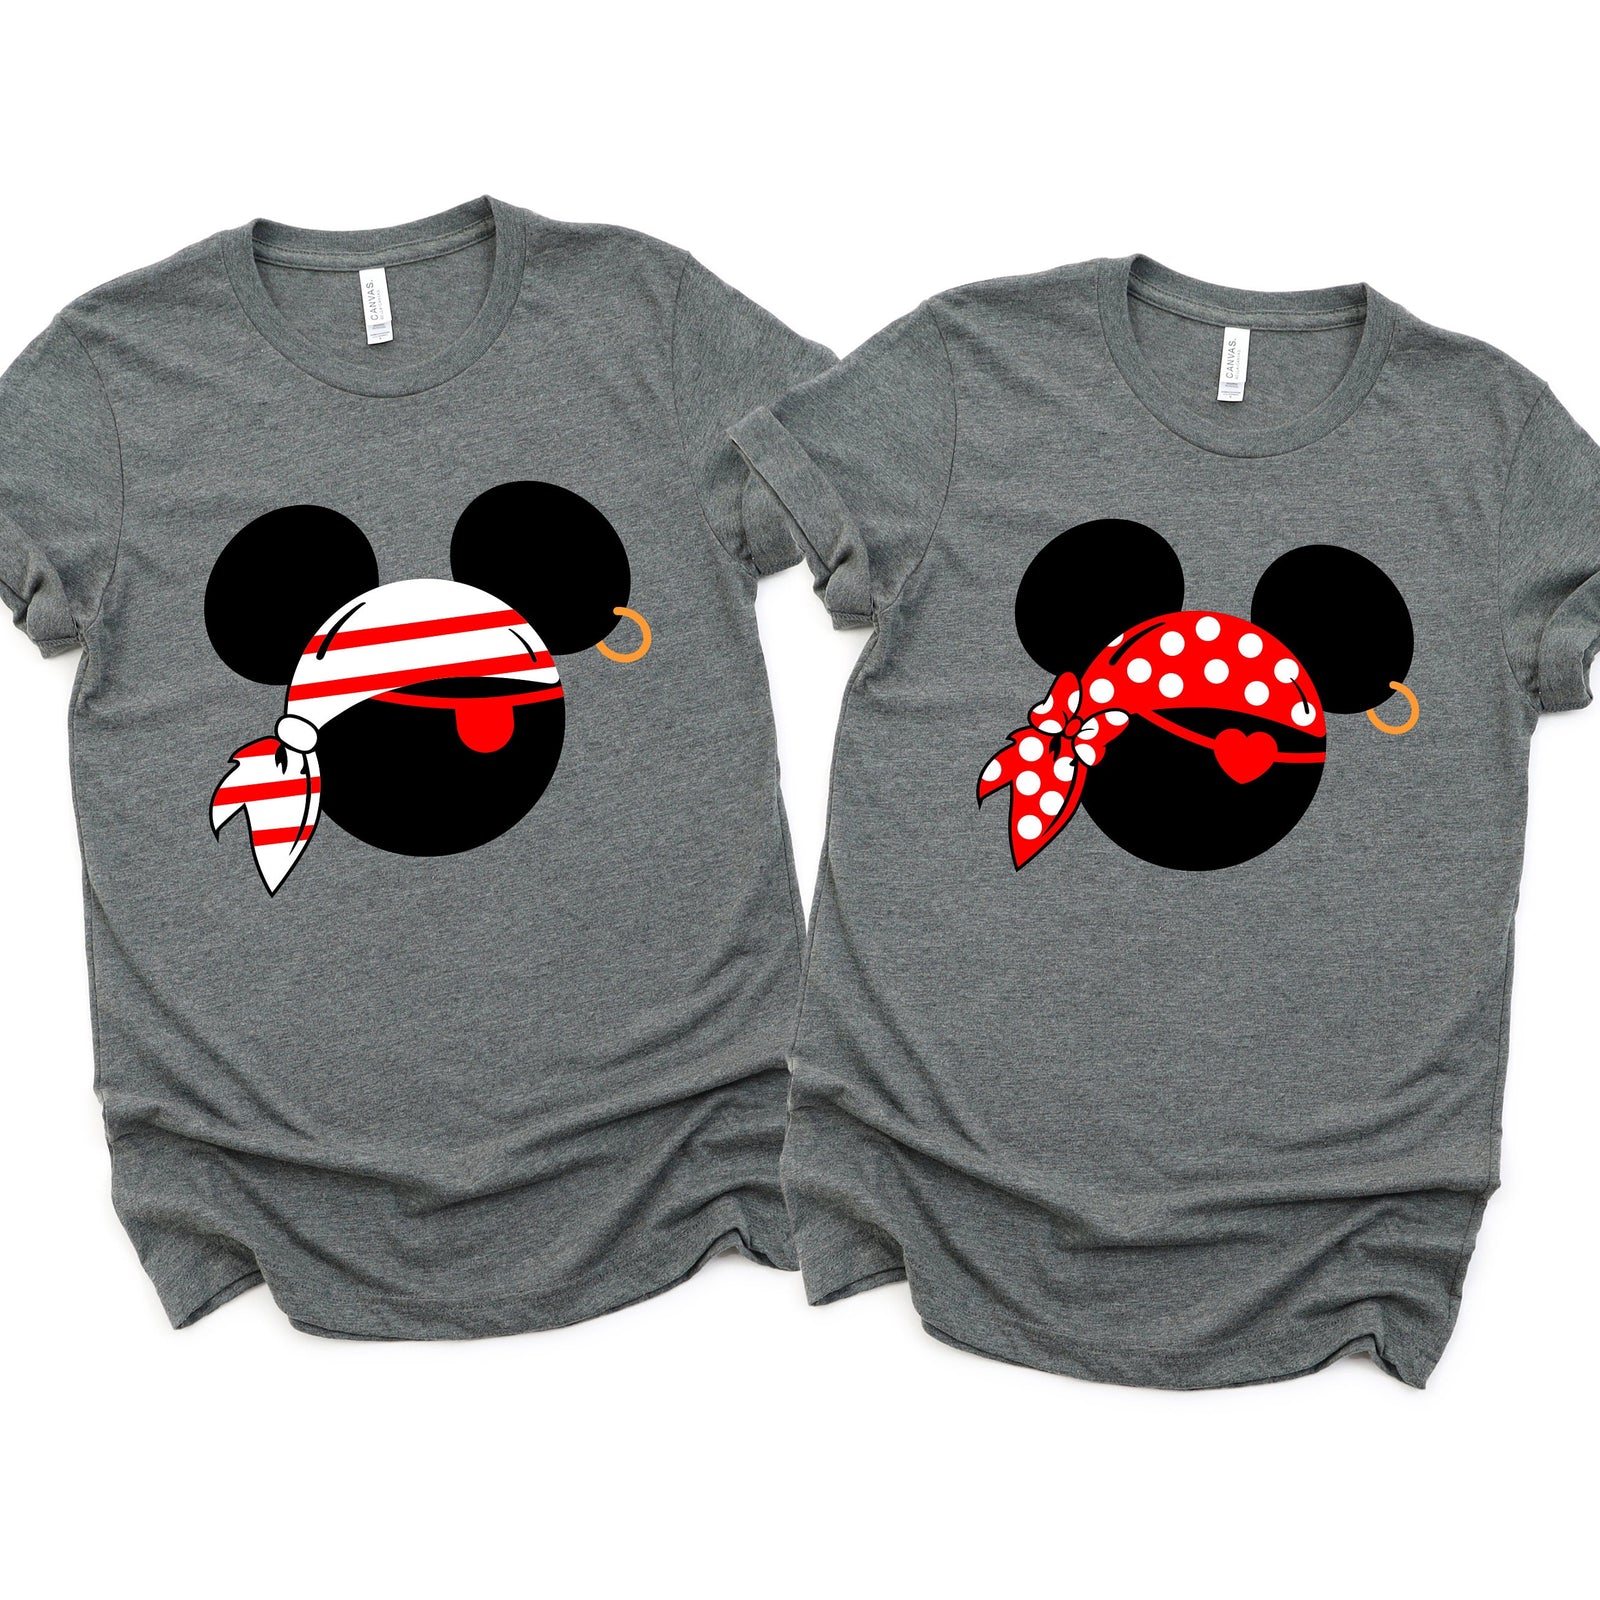 Pirate Minnie and Mickey Shirts - Disney Couples Shirt - Matching Disney Cruise Shirts - Minnie and Mickey Couple Shirt